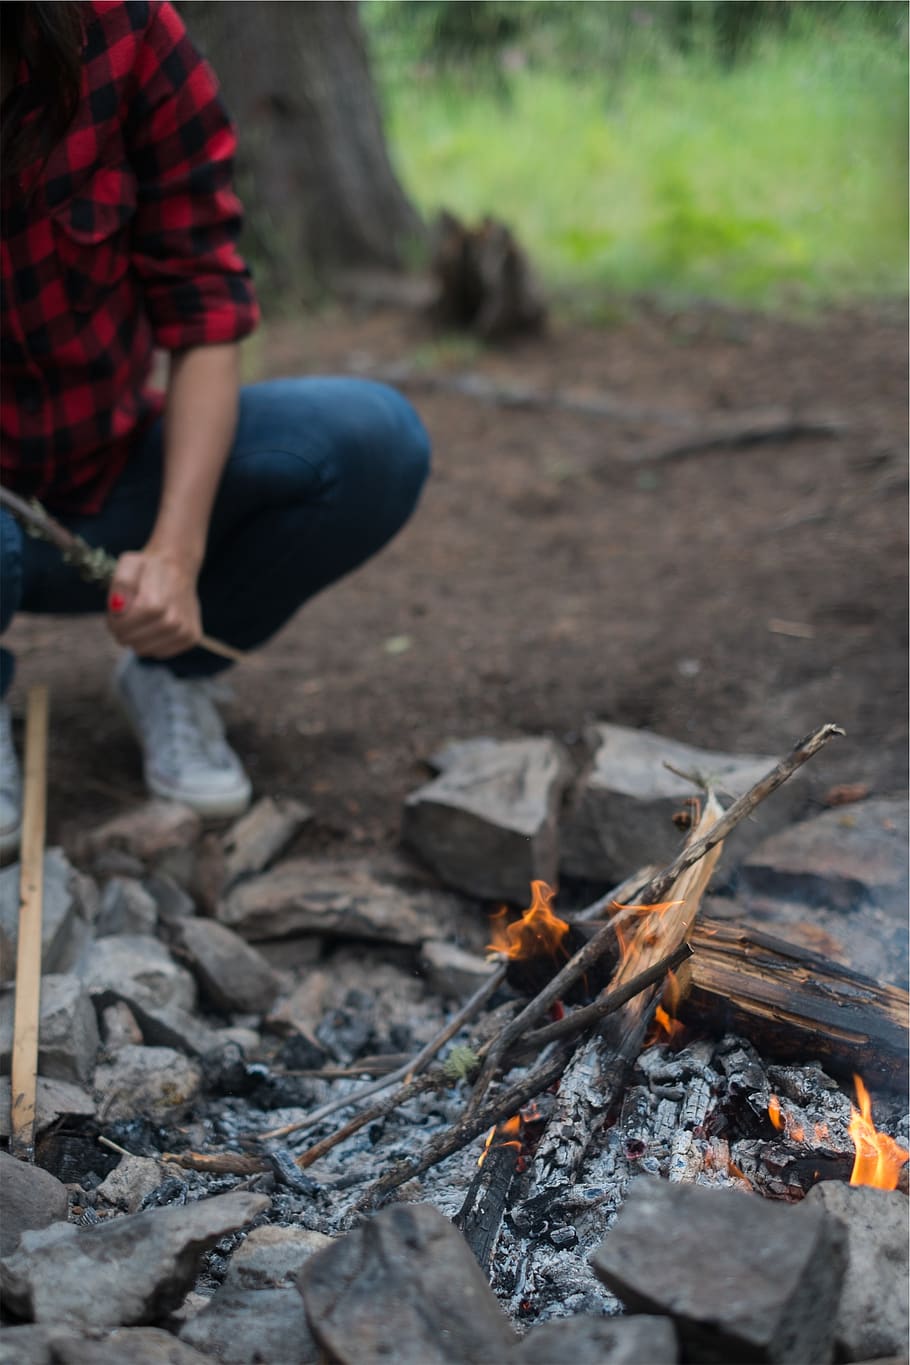 camping, fire, nature, outdoors, burning, one person, real people, fire - natural phenomenon, heat - temperature, flame